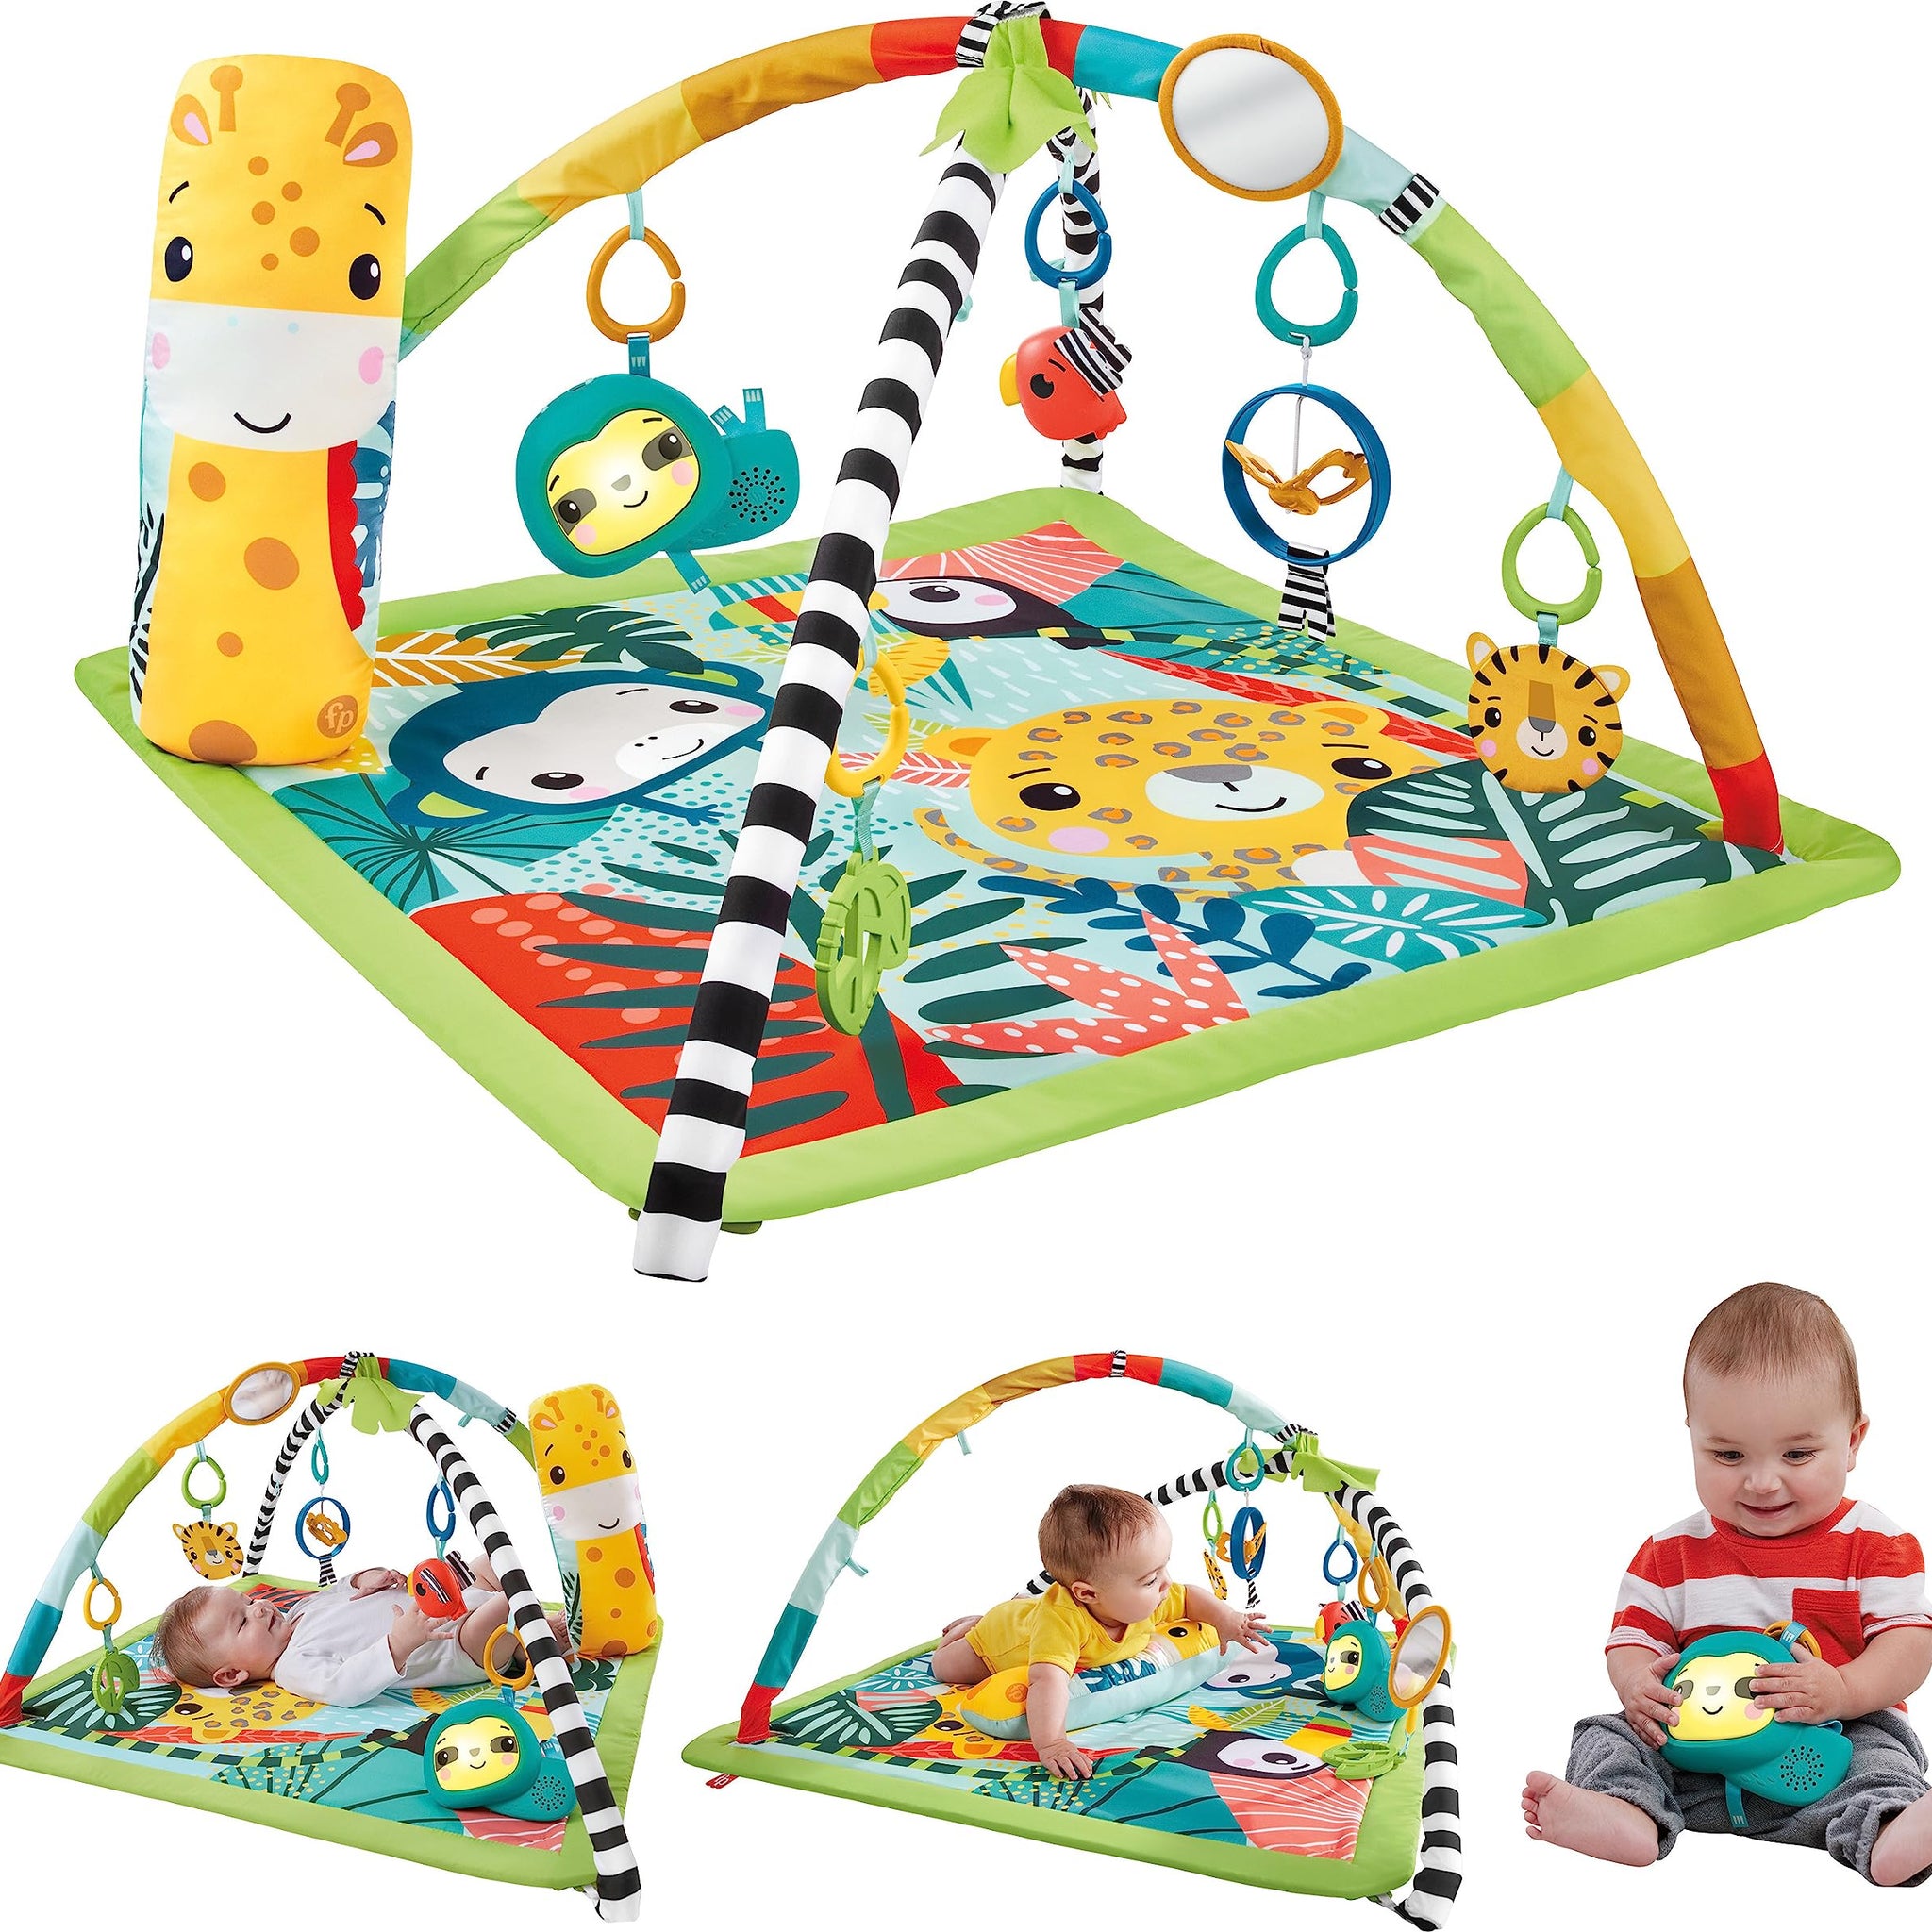 Fisher-Price Baby Newborn To Toddler Playmat 3-In-1 Rainforest Sensory Gym with Tummy Wedge,5 Baby Toys and Music & Lights Sloth